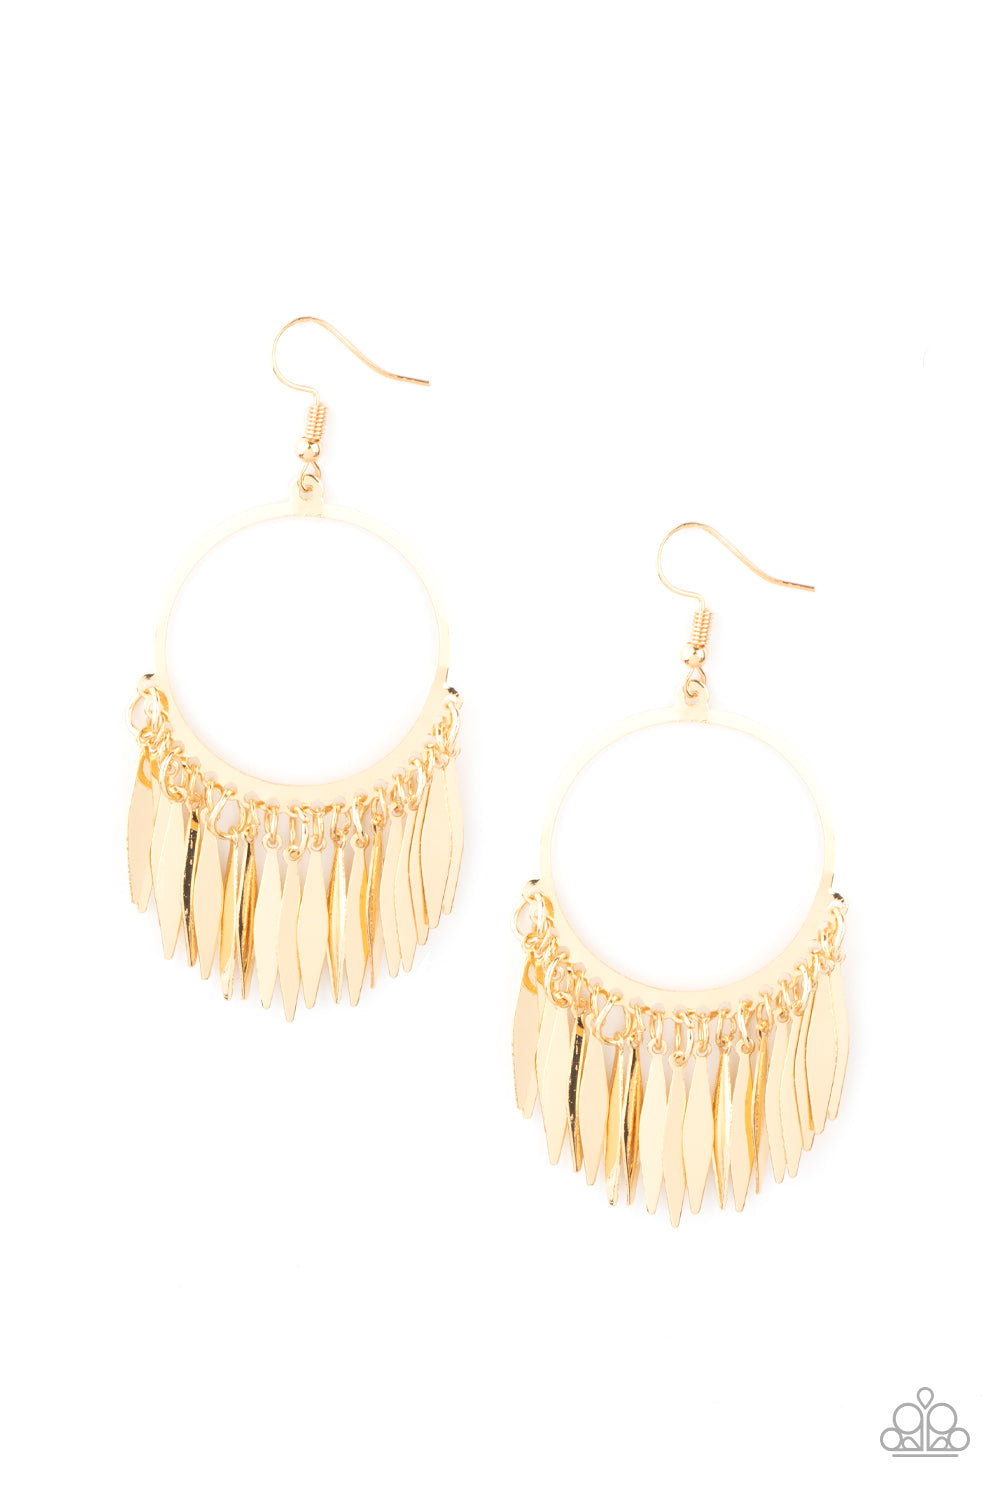 Paparazzi Accessories - Flared flat bars stream out from the bottom of a glistening gold hoop, creating a radiant fringe. Earring attaches to a standard fishhook fitting.